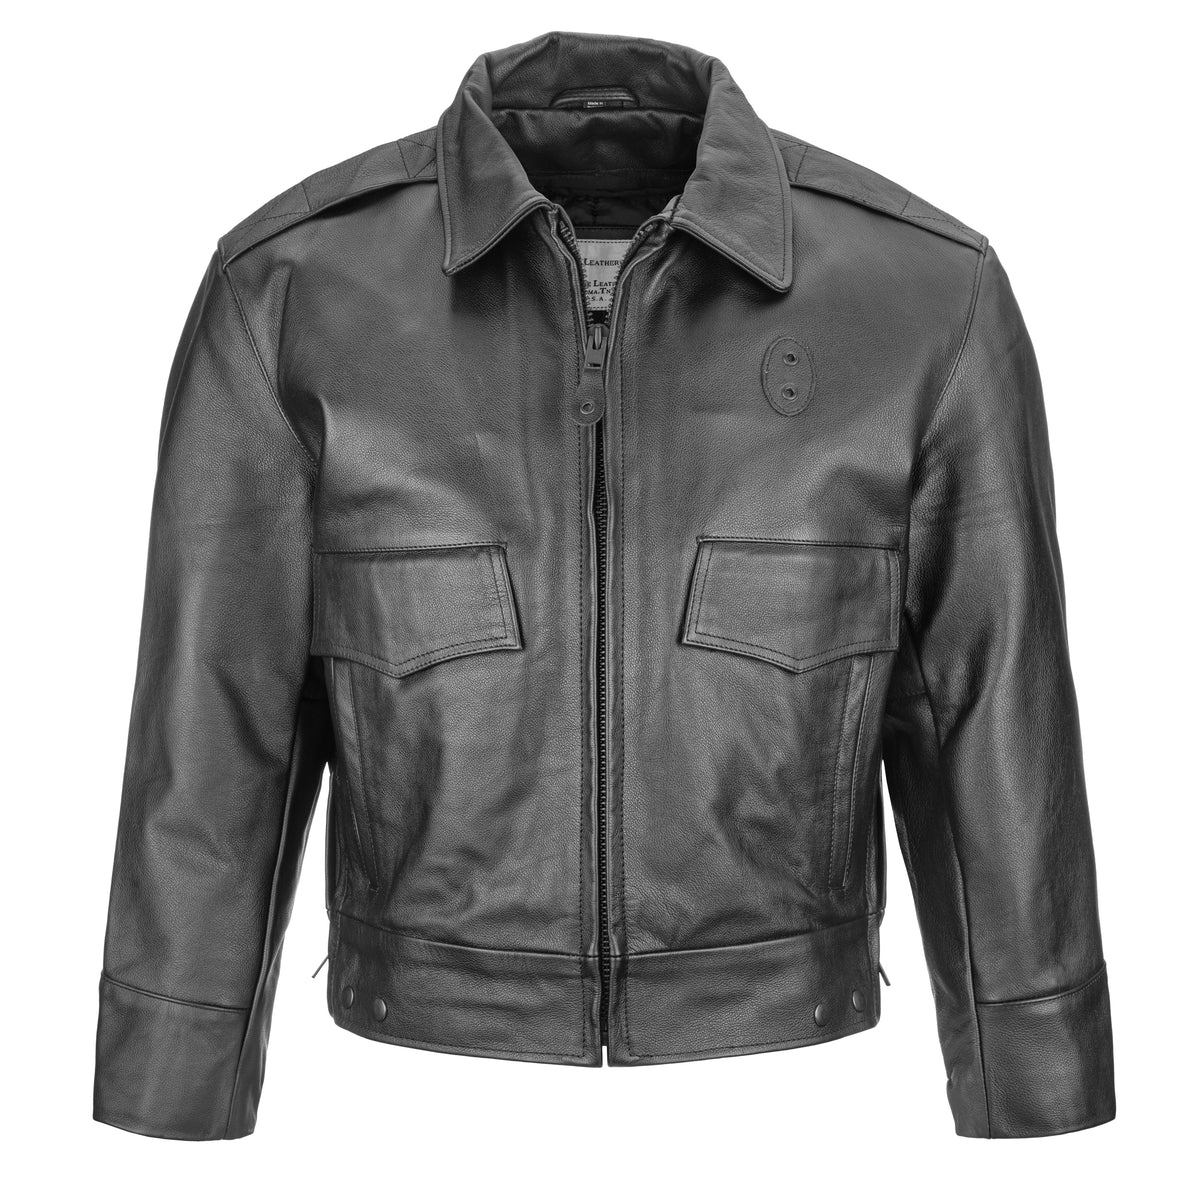 Indianapolis Black Cowhide Leather Police Jacket – Taylor's 